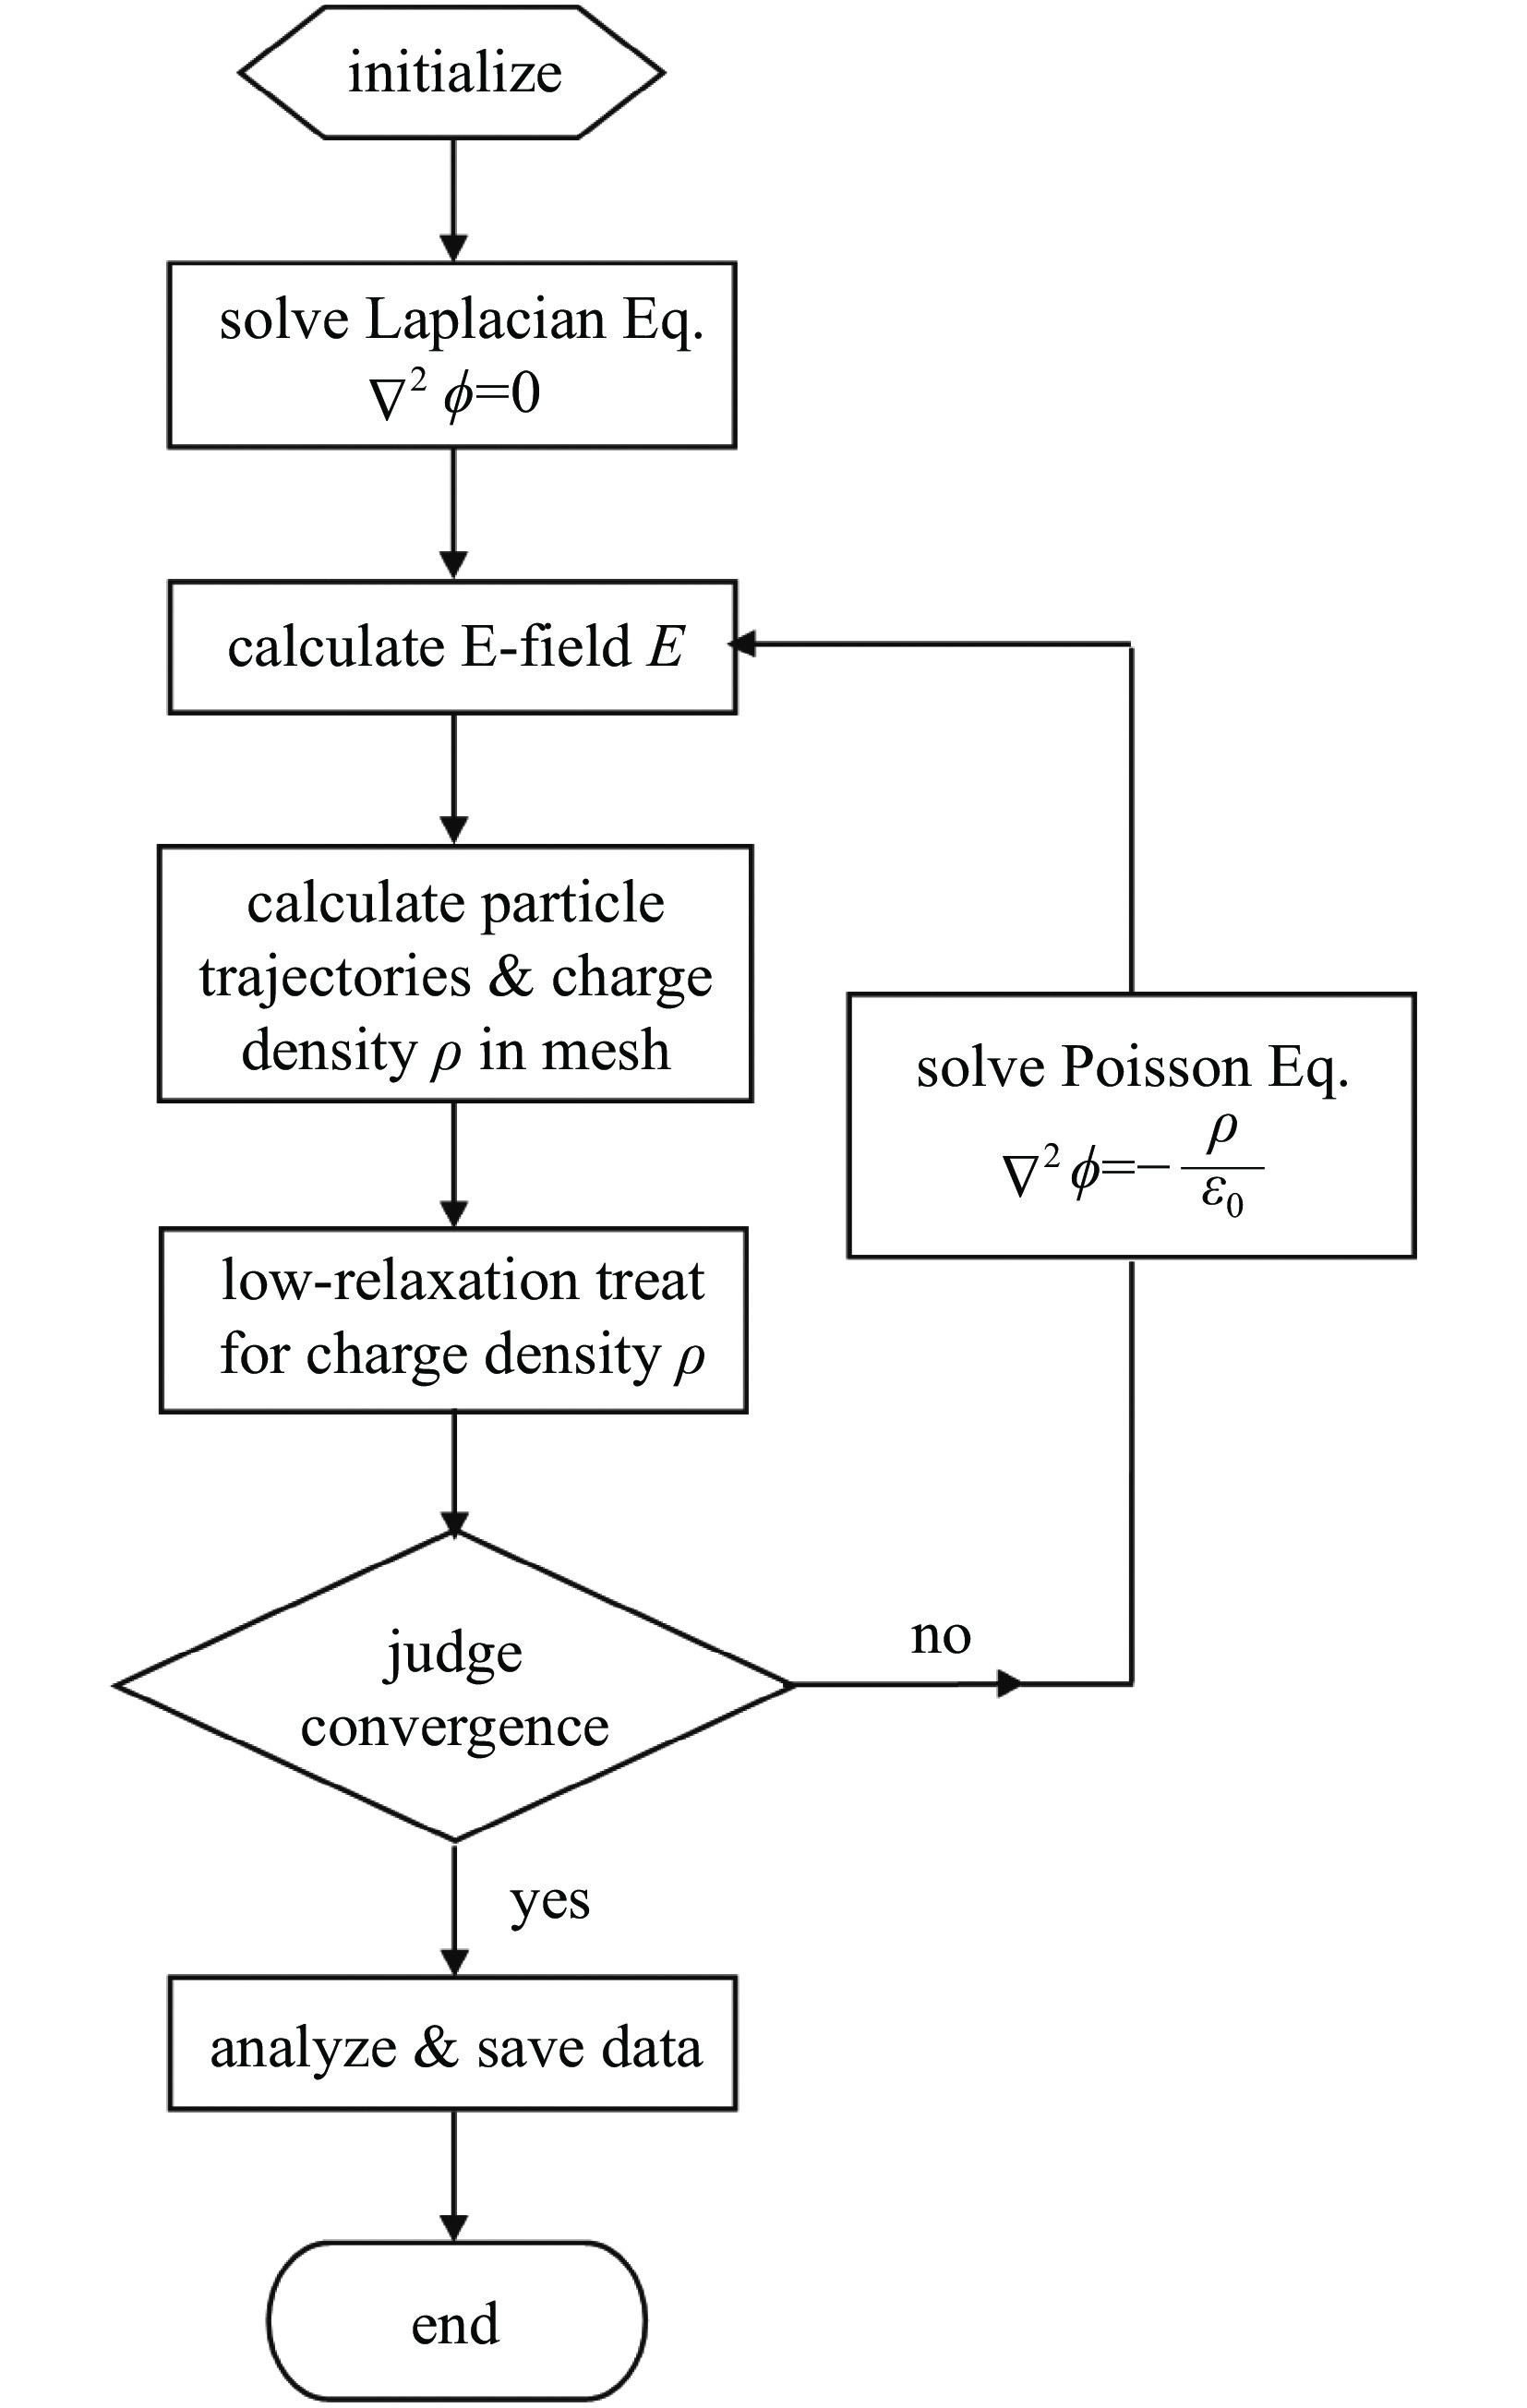 Basic flow chart of the numerical simulation with IBSimu code